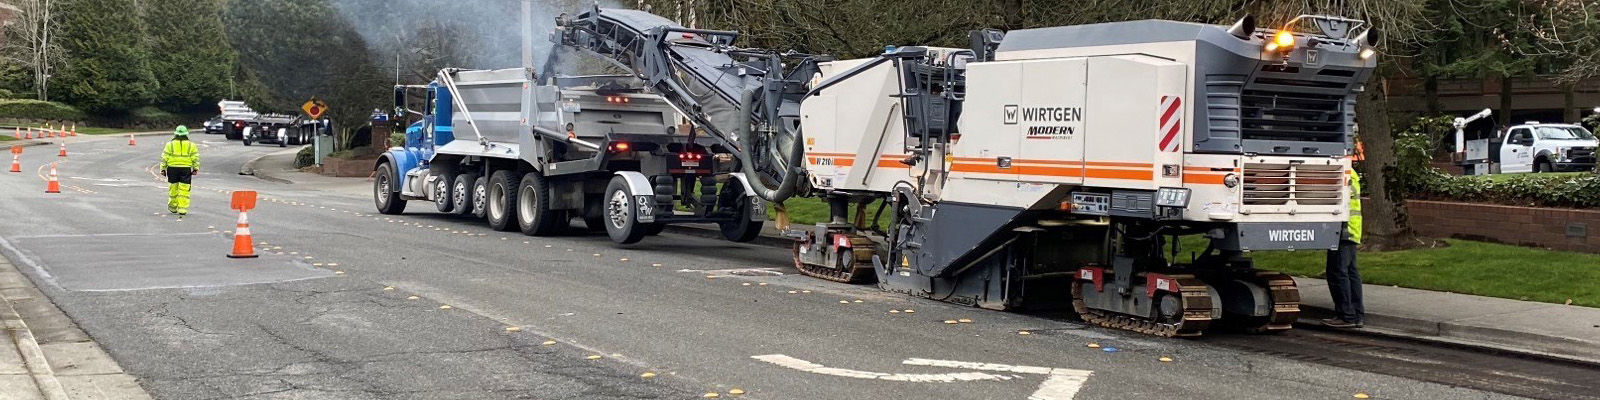 A dump truck works with another machine to scarify the roadway in preparation for repaving. There are construciton cones and two people dressed in high visibility clothes on the left side of the roadway.